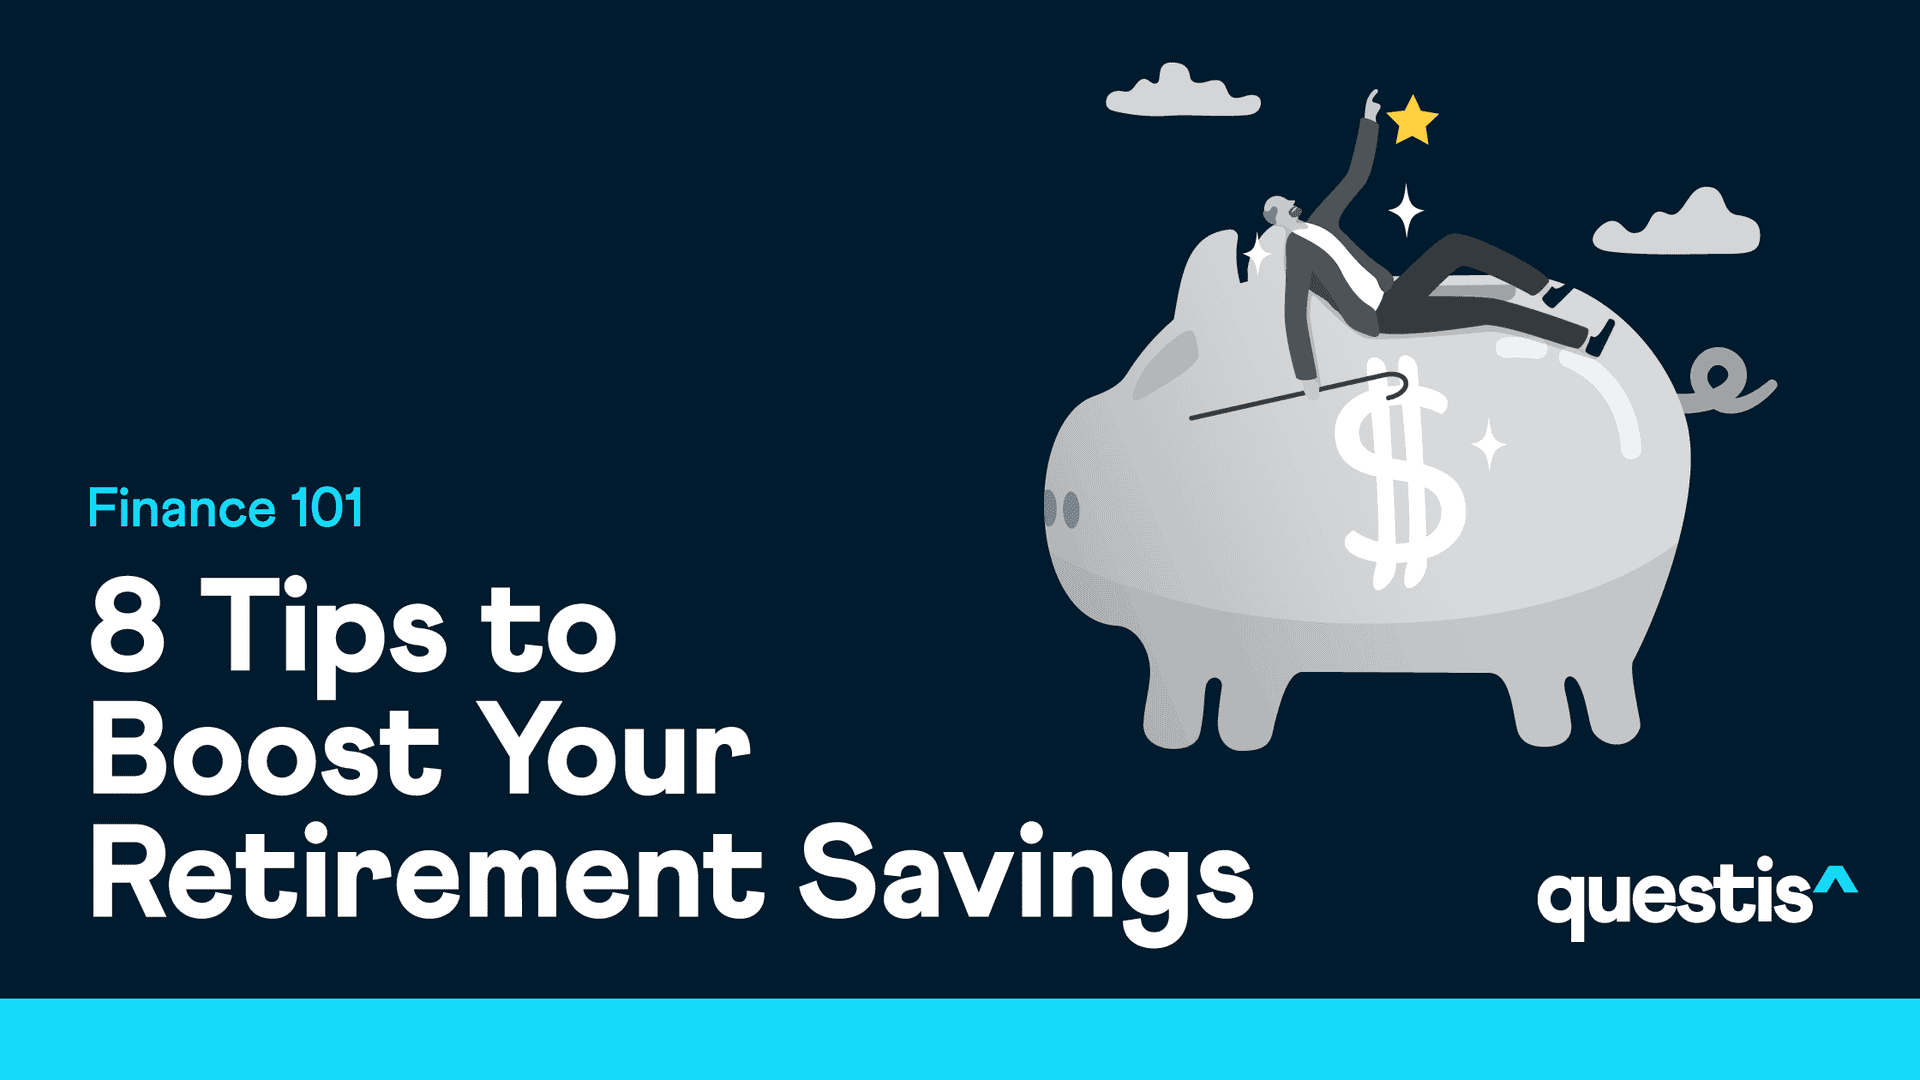 8 Tips to Boost Your Retirement Savings